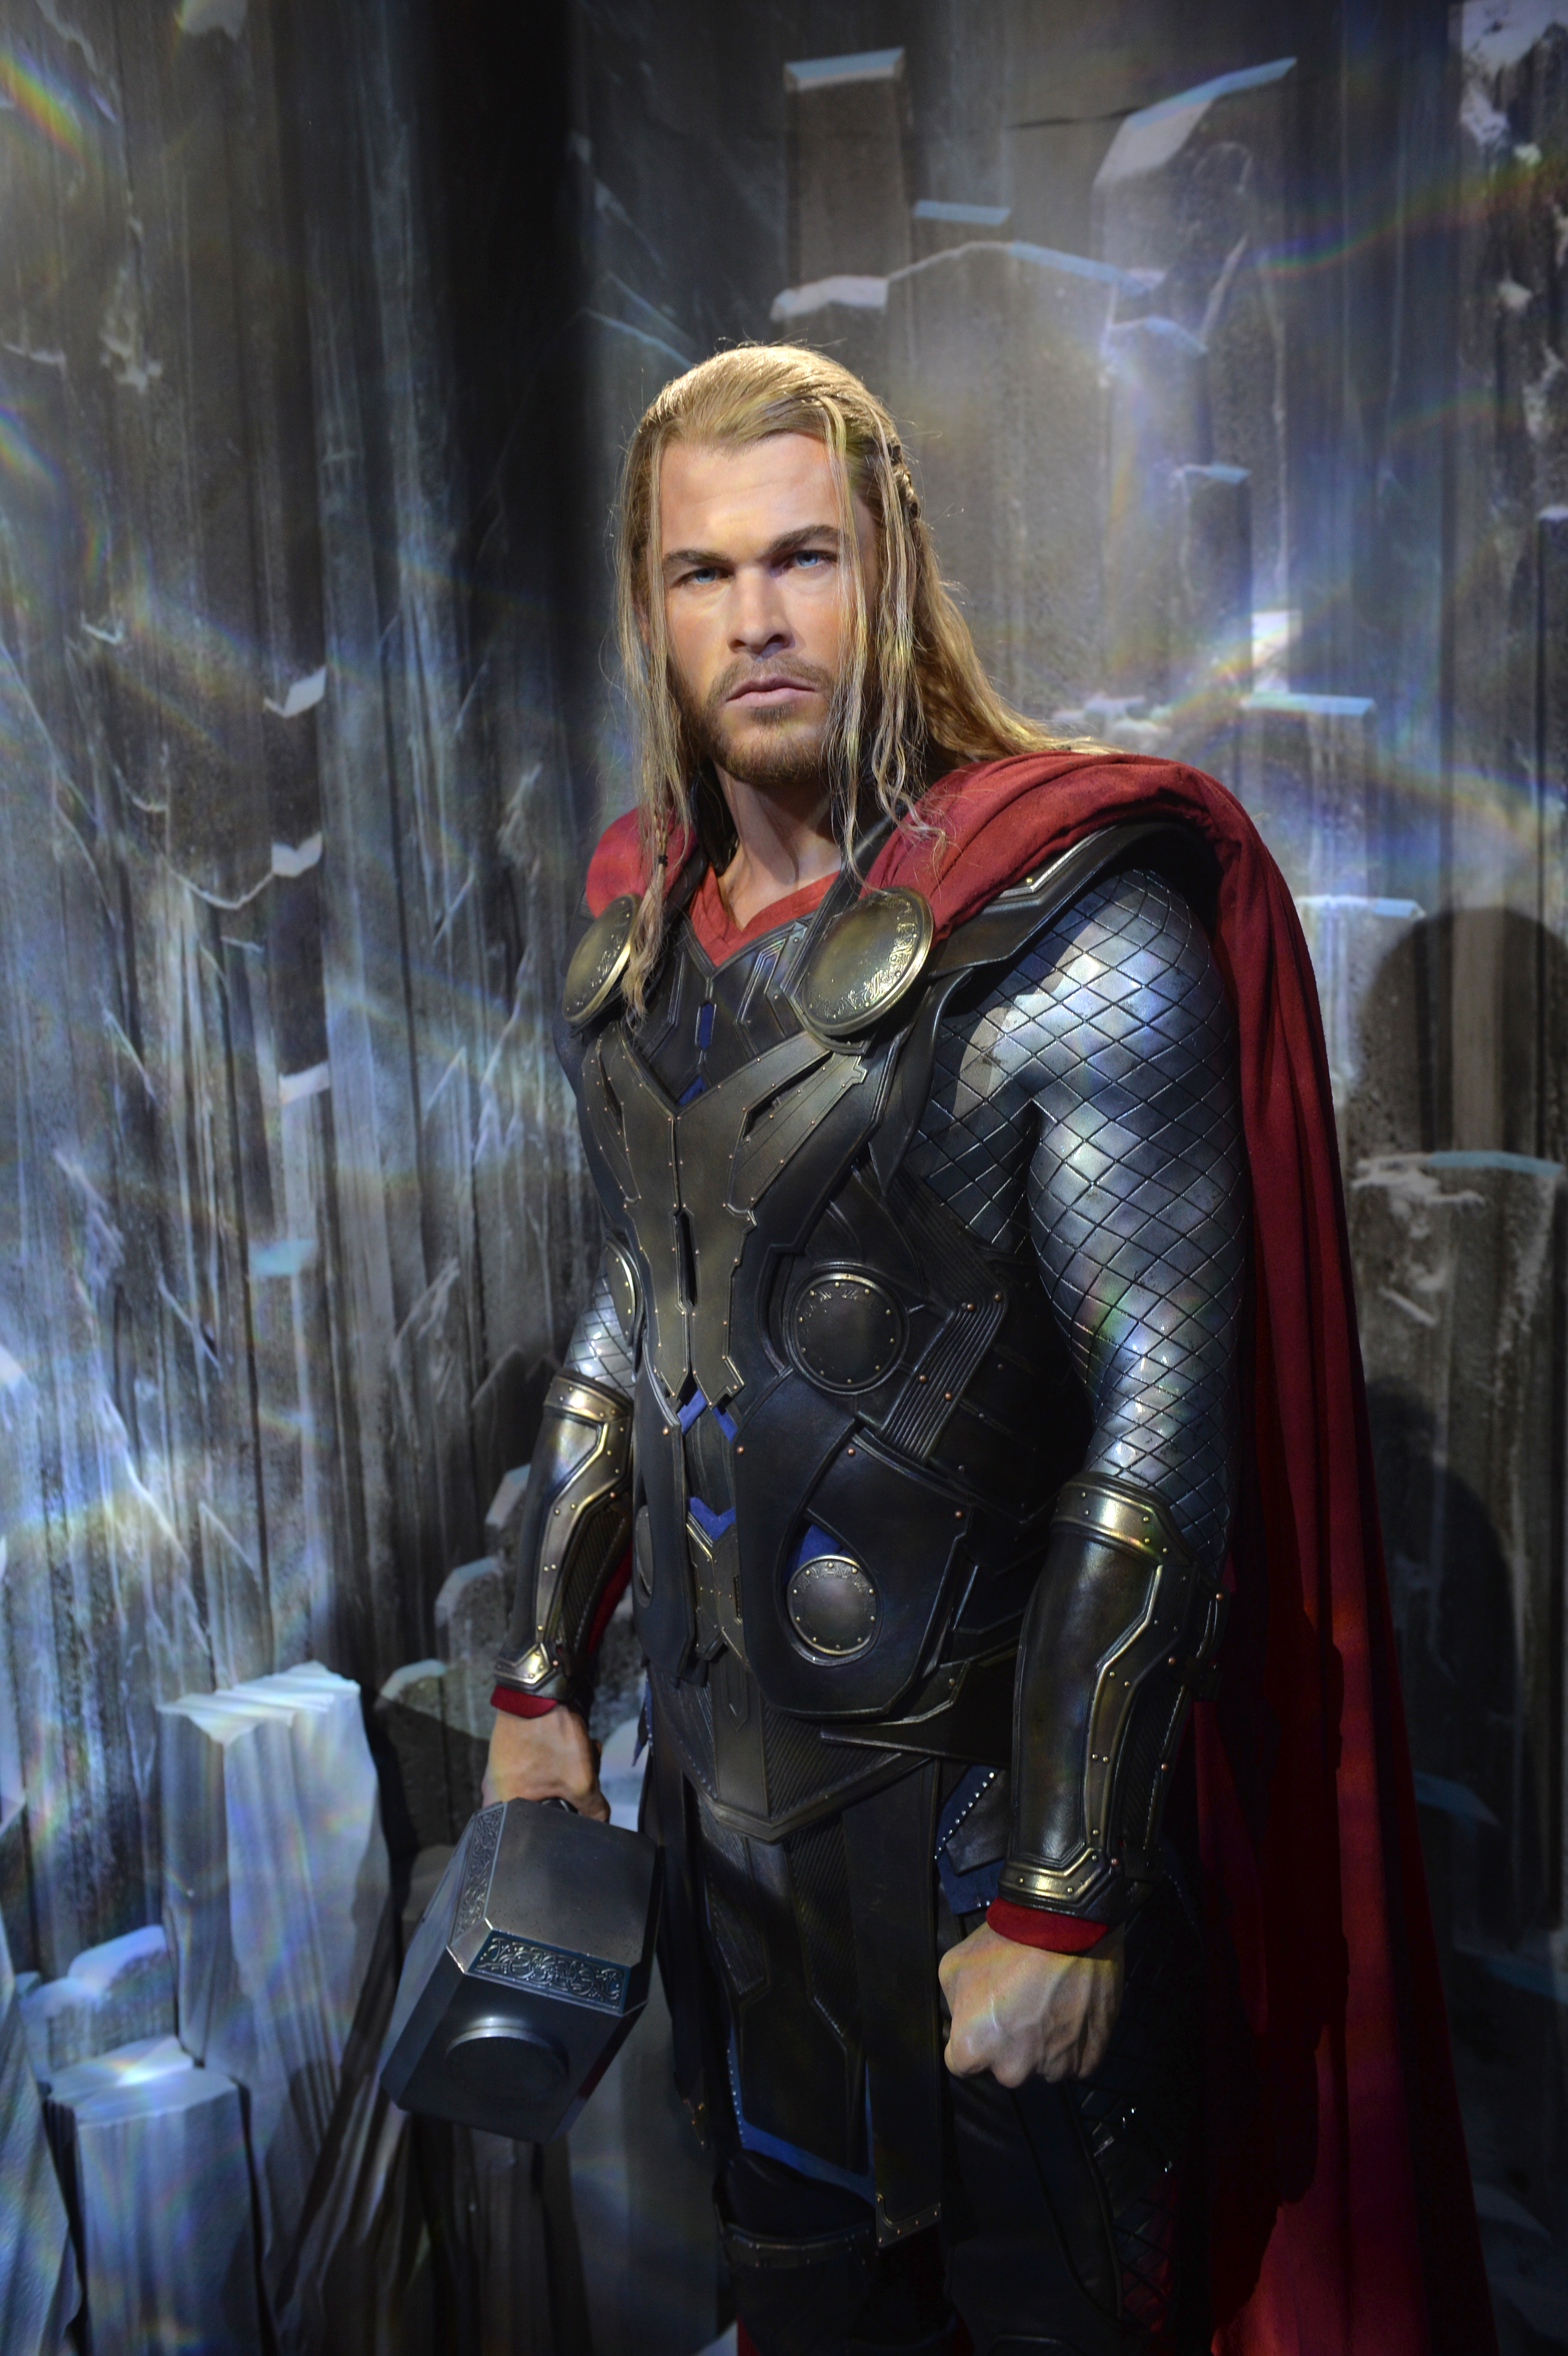 Thor wax figure holding his hammer at Madame Tussauds Blackpool